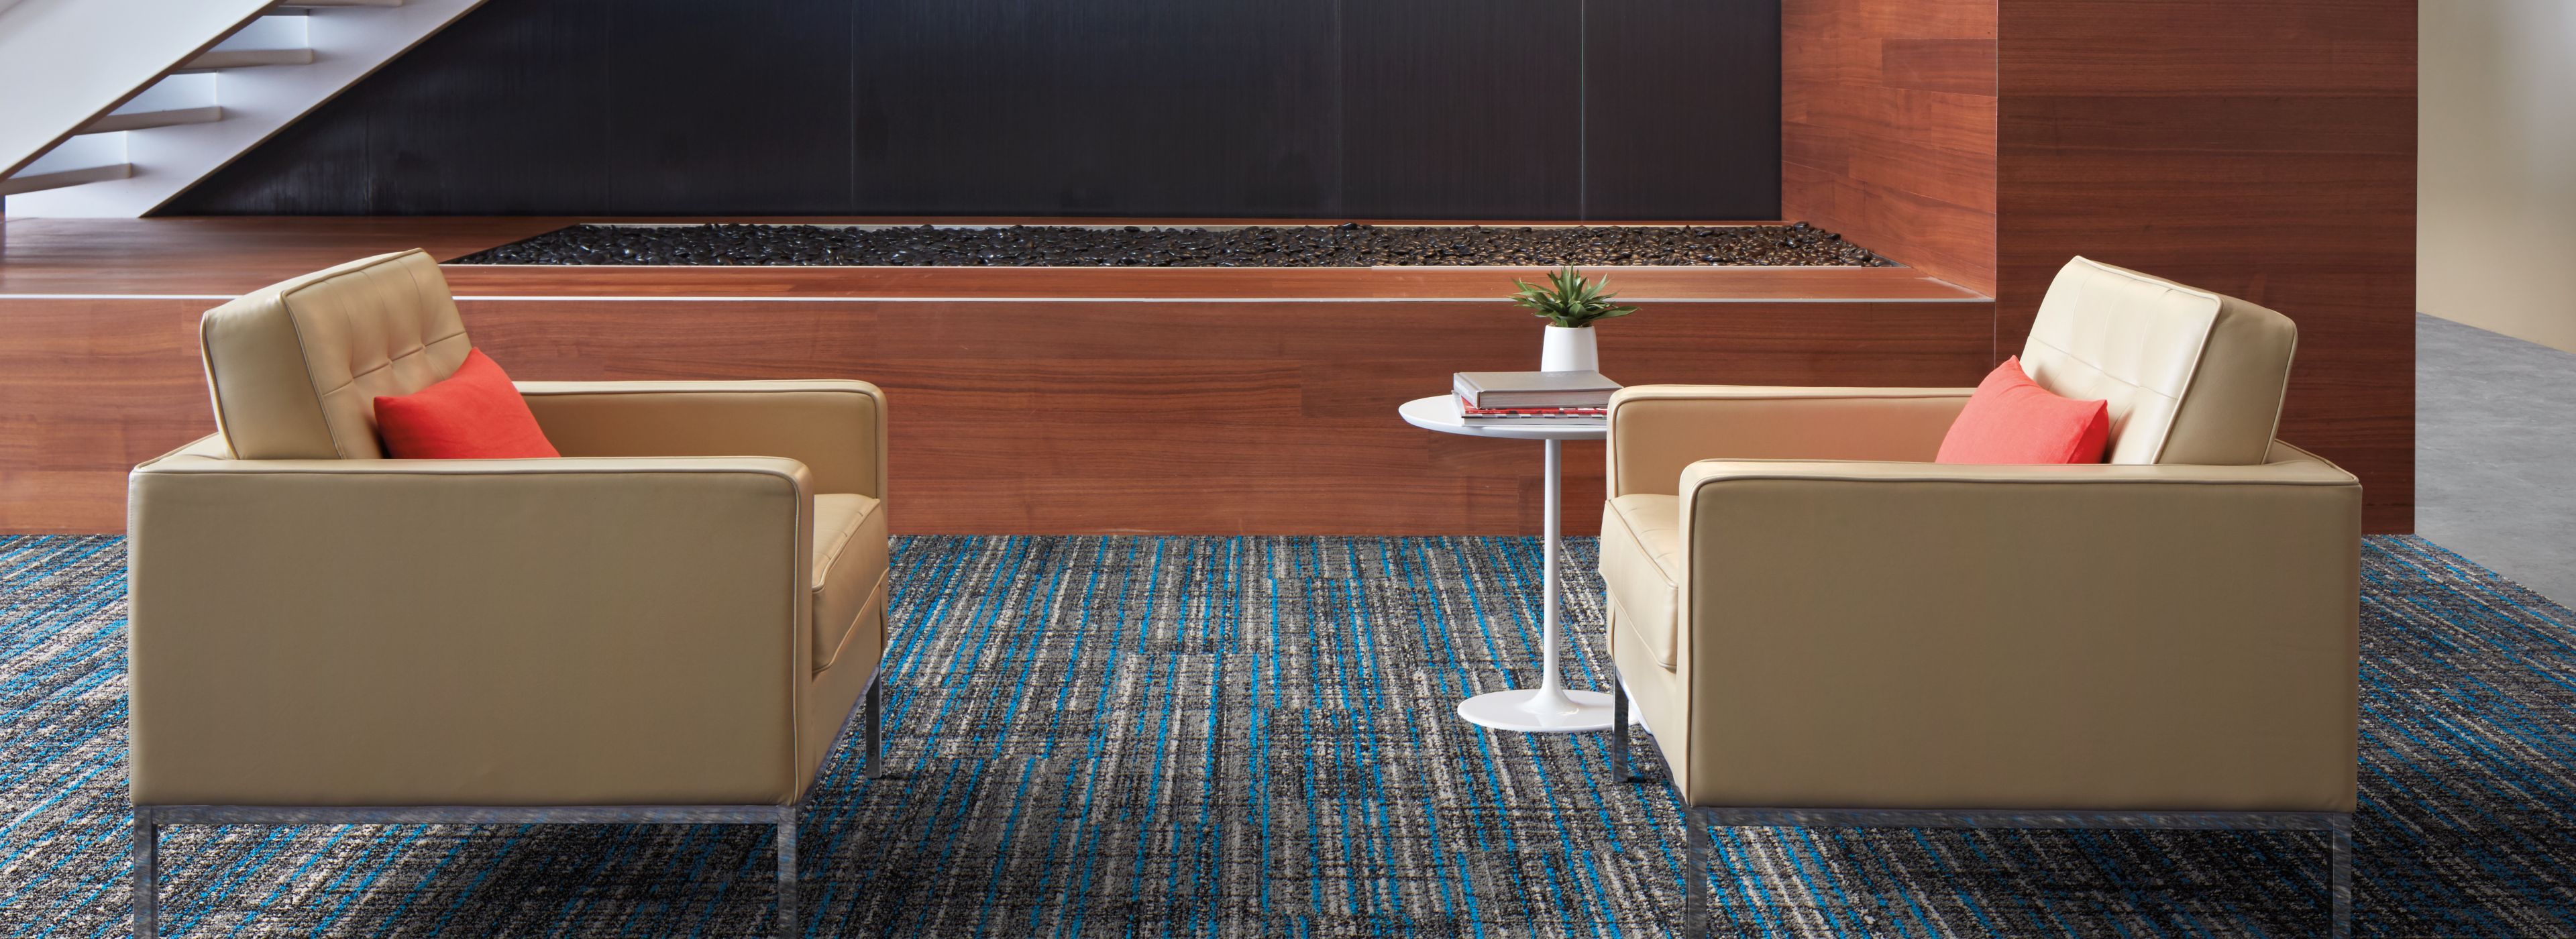 Interface Upload carpet tile and Textured Stones LVT in lobby area with couches image number 1